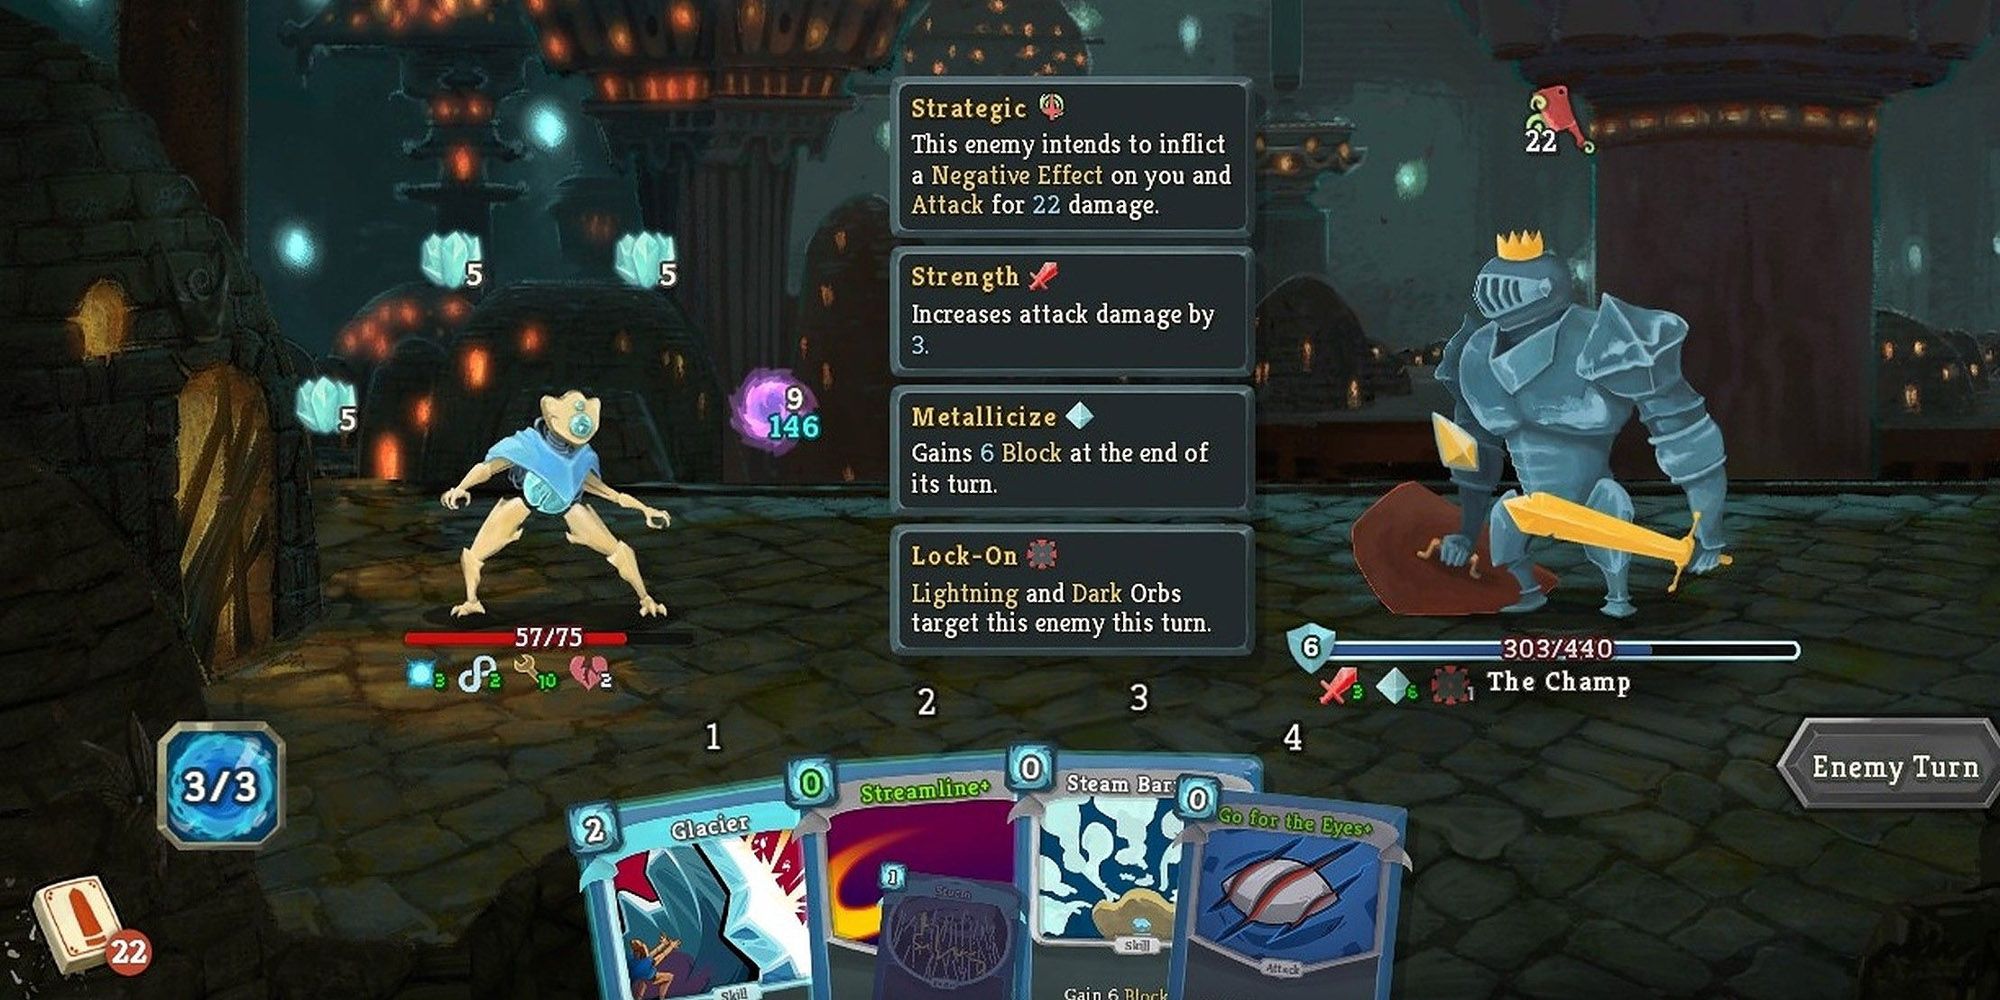 slay the spire the defect guide